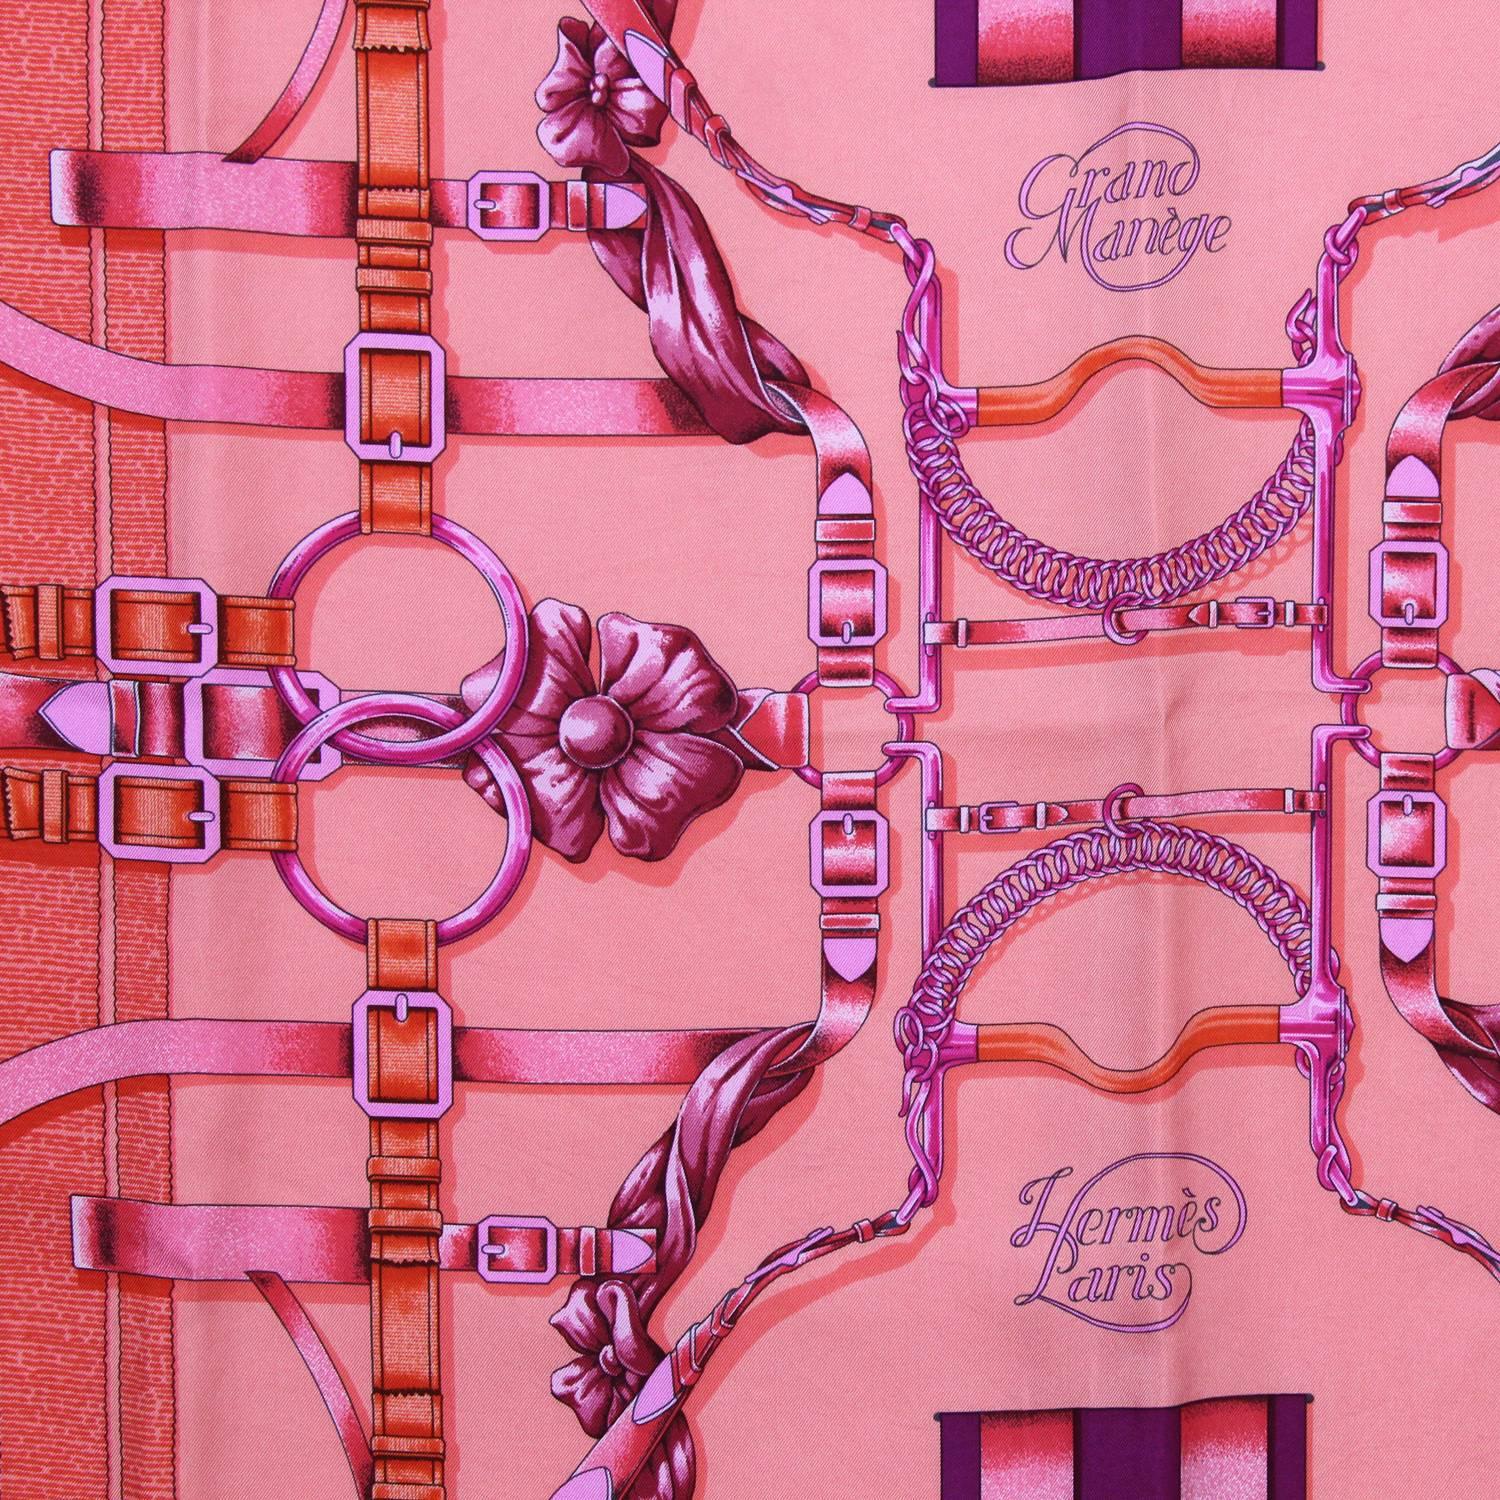 Lively Hermès Hermès "Grand Manège"  silk scarf, borned from the crativity of the designer Henri d'Origny, in a multicolor printed pattern with a mix of bows, ribbons and buckles in shocking pink, fuchsia and red colors. This piece is in